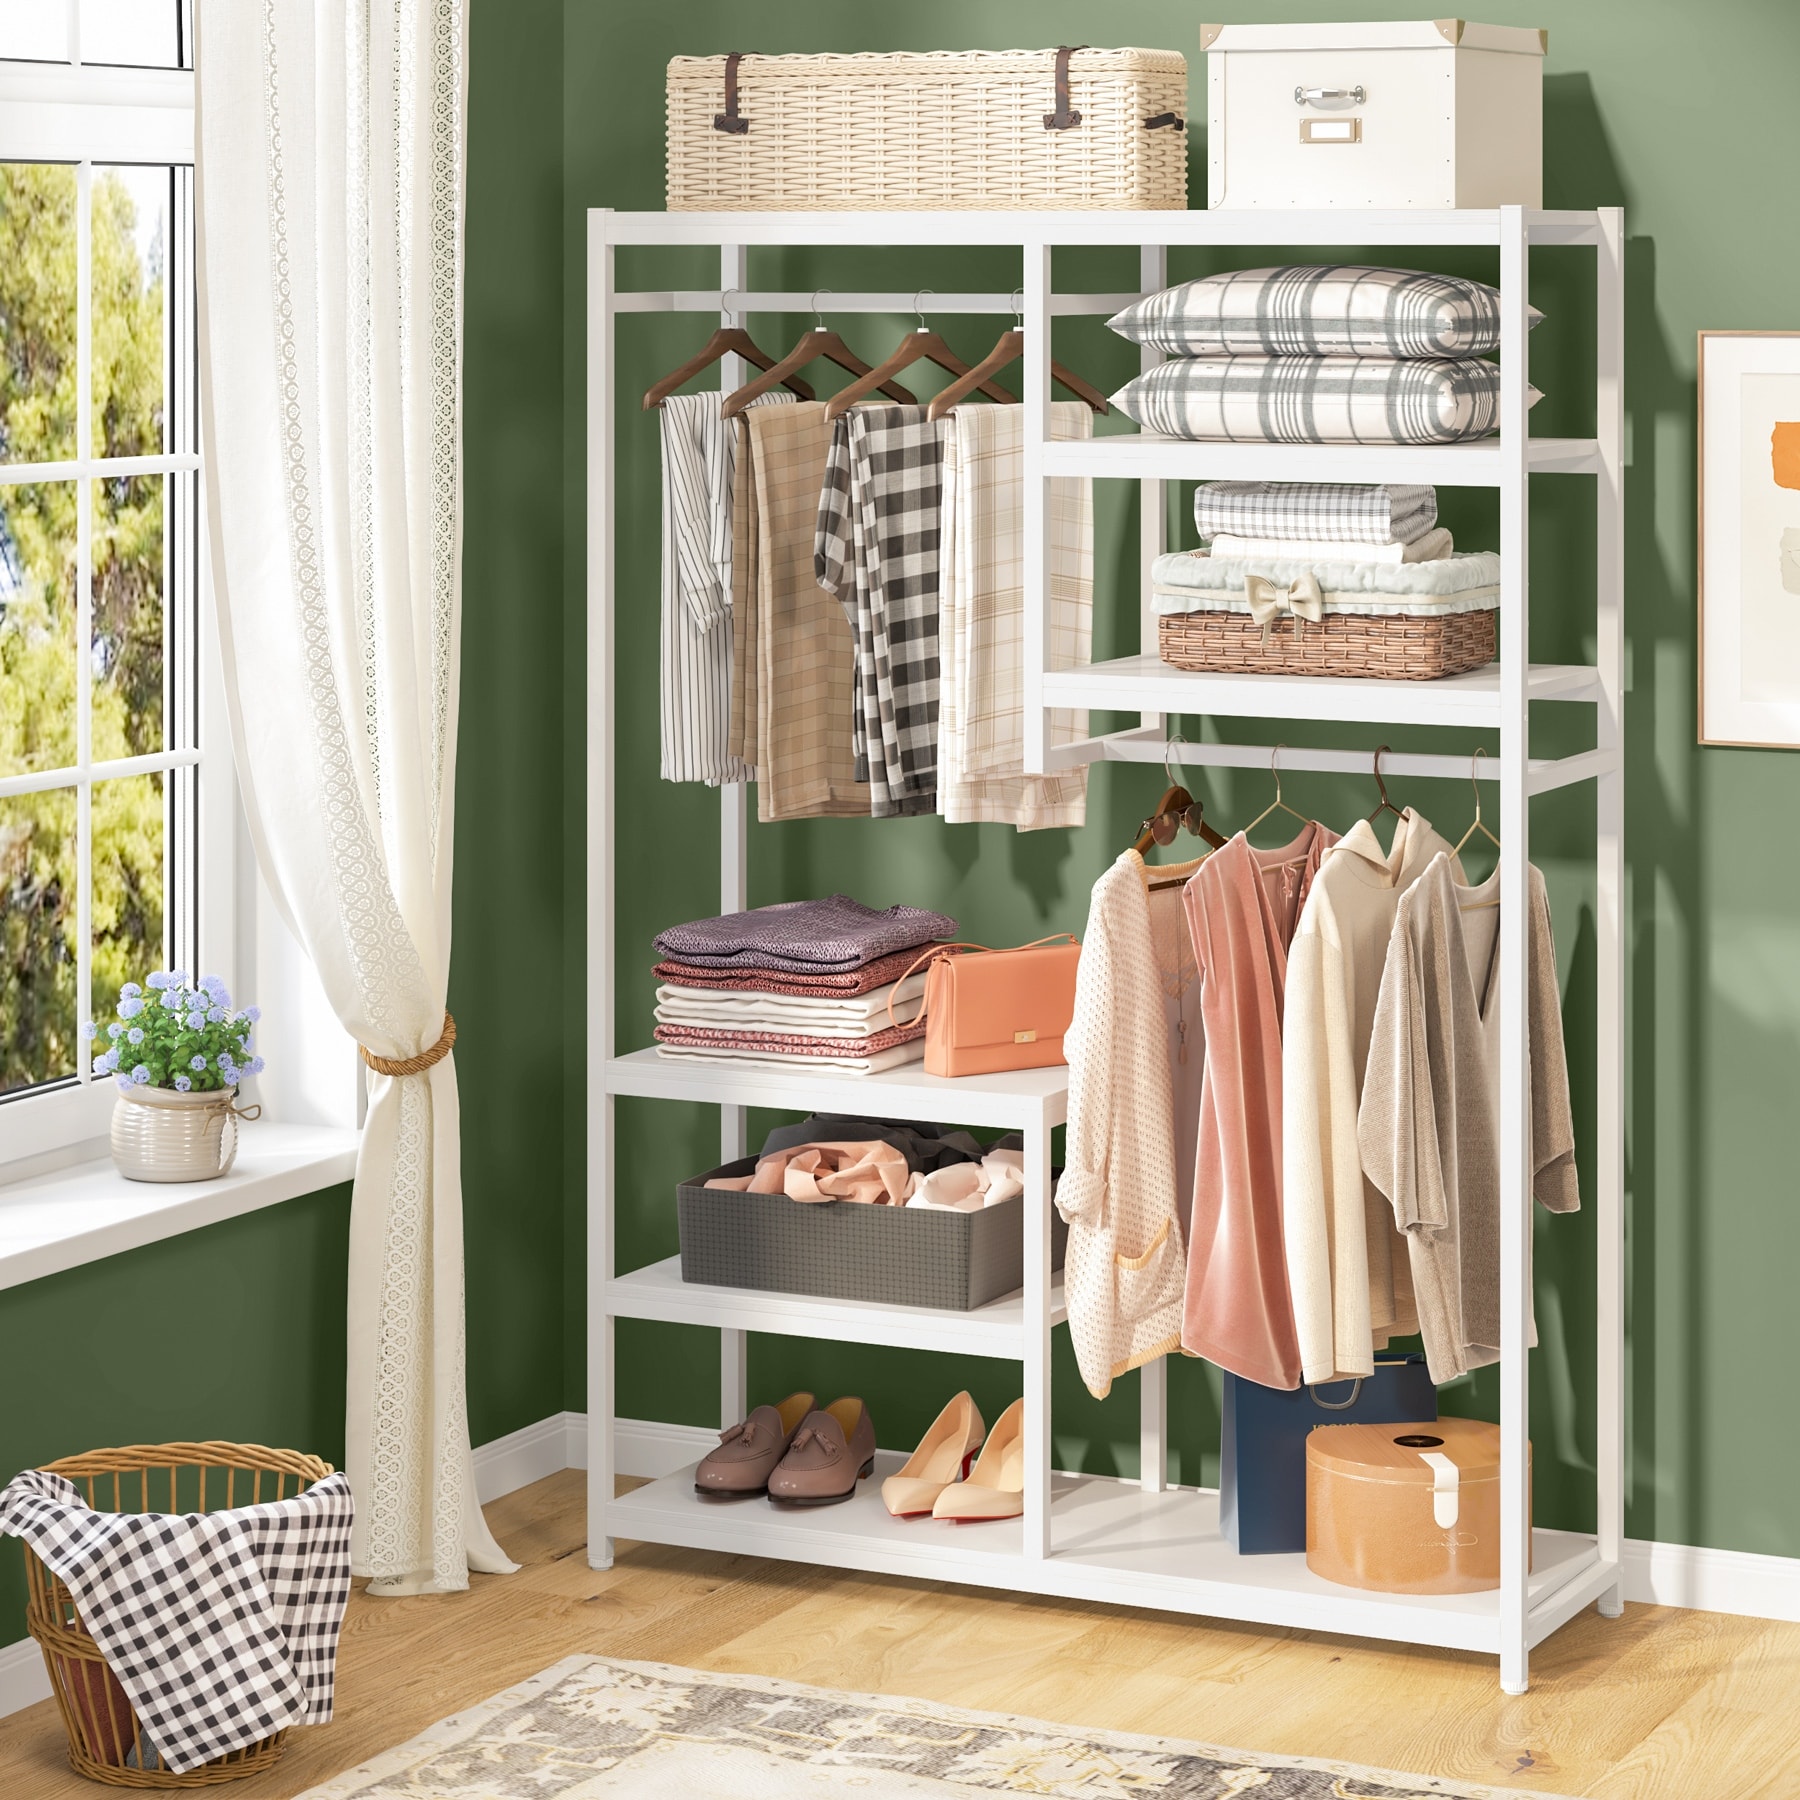 https://ak1.ostkcdn.com/images/products/is/images/direct/c5418ffe1a11b39d66b94544542212ce24ce0114/Free-Standing-Closet-Organizer-Double-Hanging-Rod-Clothes-Garment-Racks.jpg